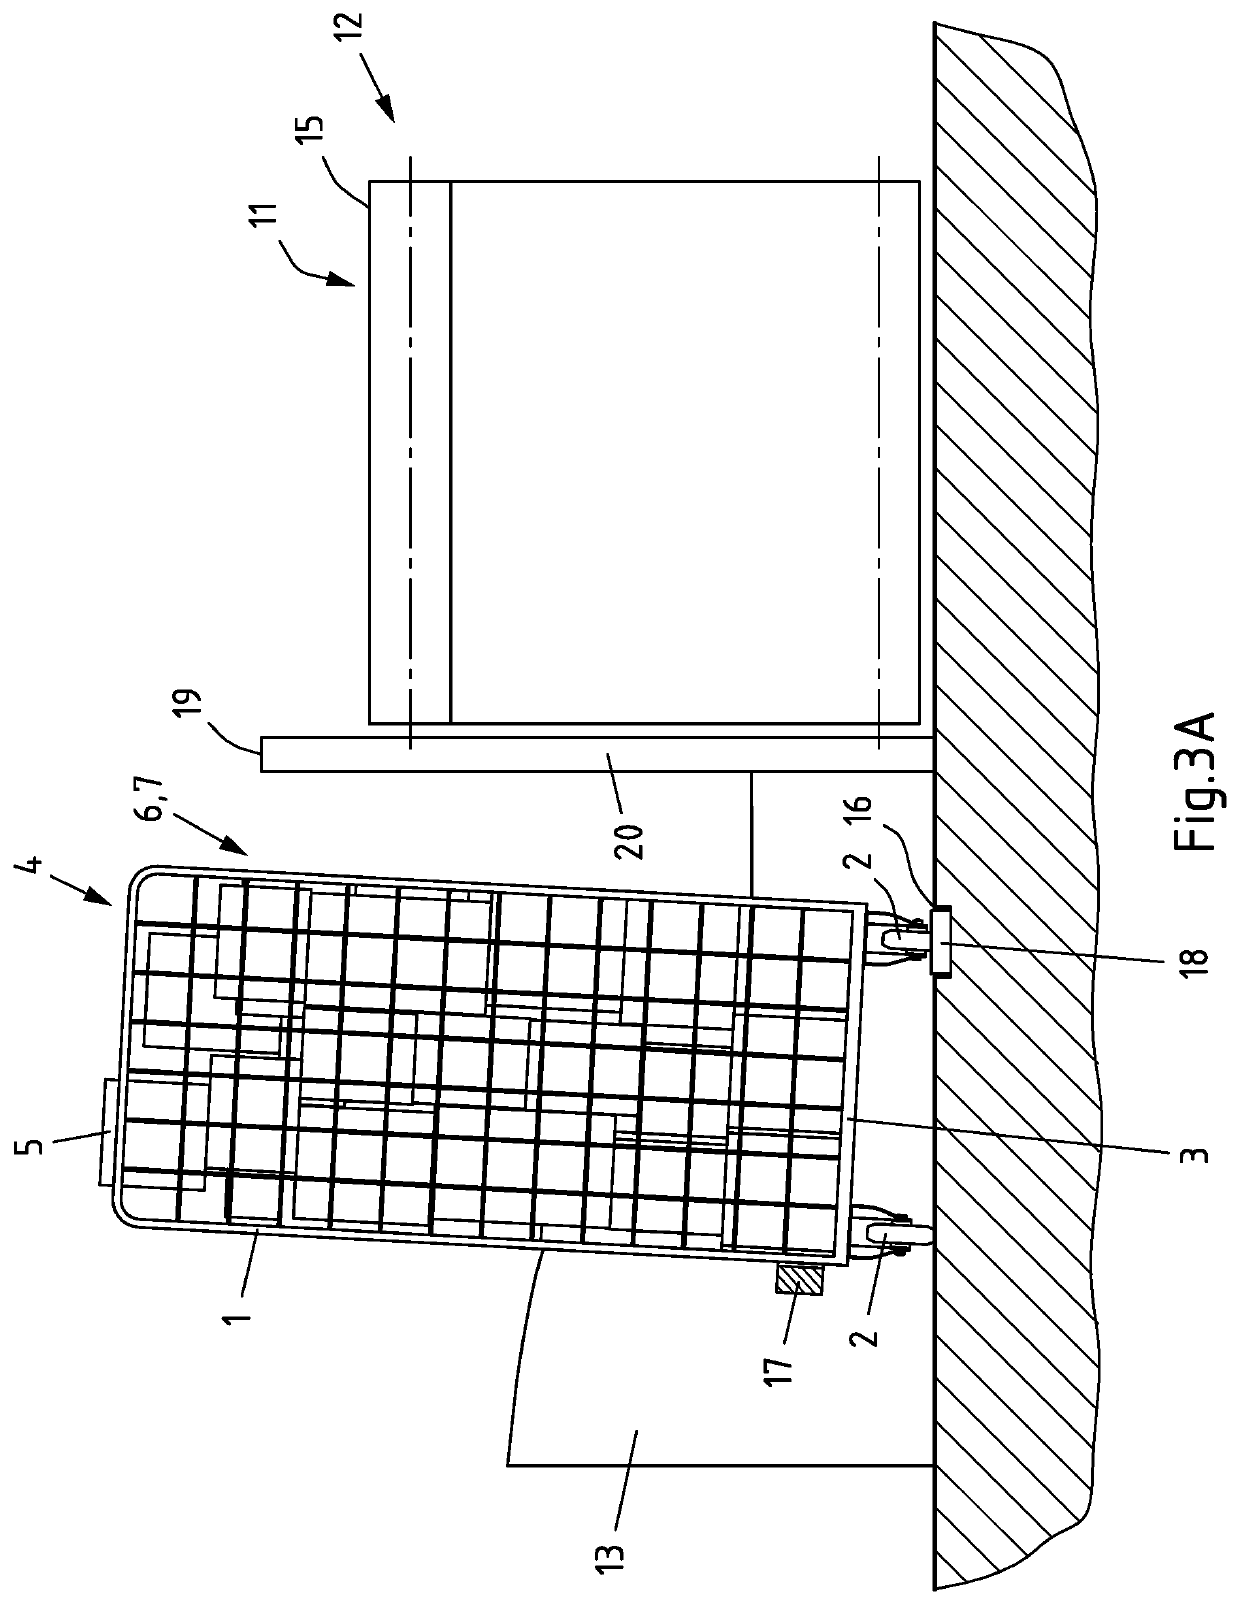 Method for unloading packages from a tipped container onto a conveyor belt